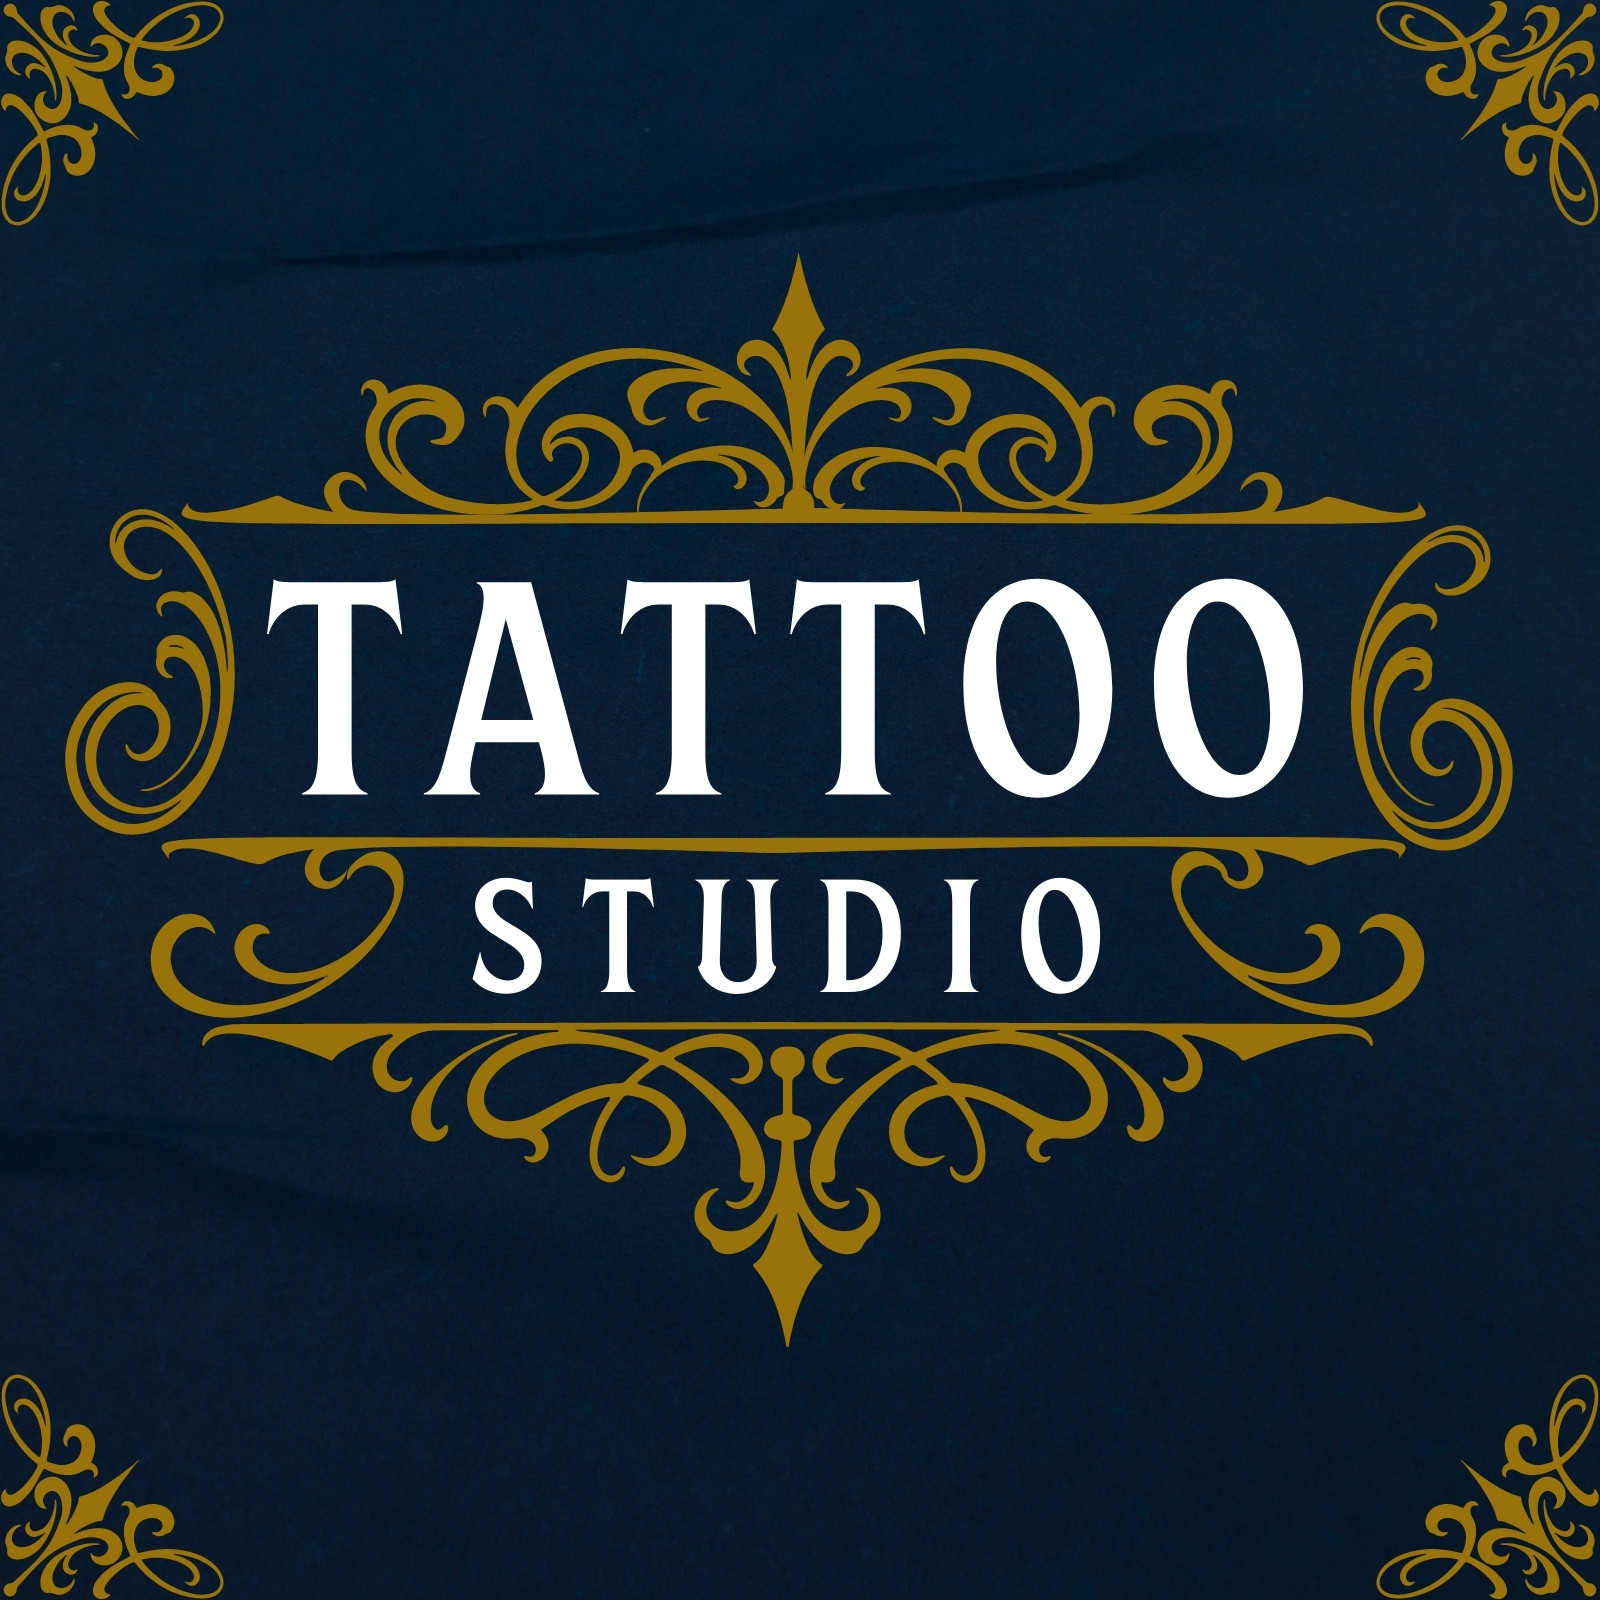 Elegant, Serious, Tattoo Logo Design for Keeps it siple and smart by  LotusBlue | Design #16517061